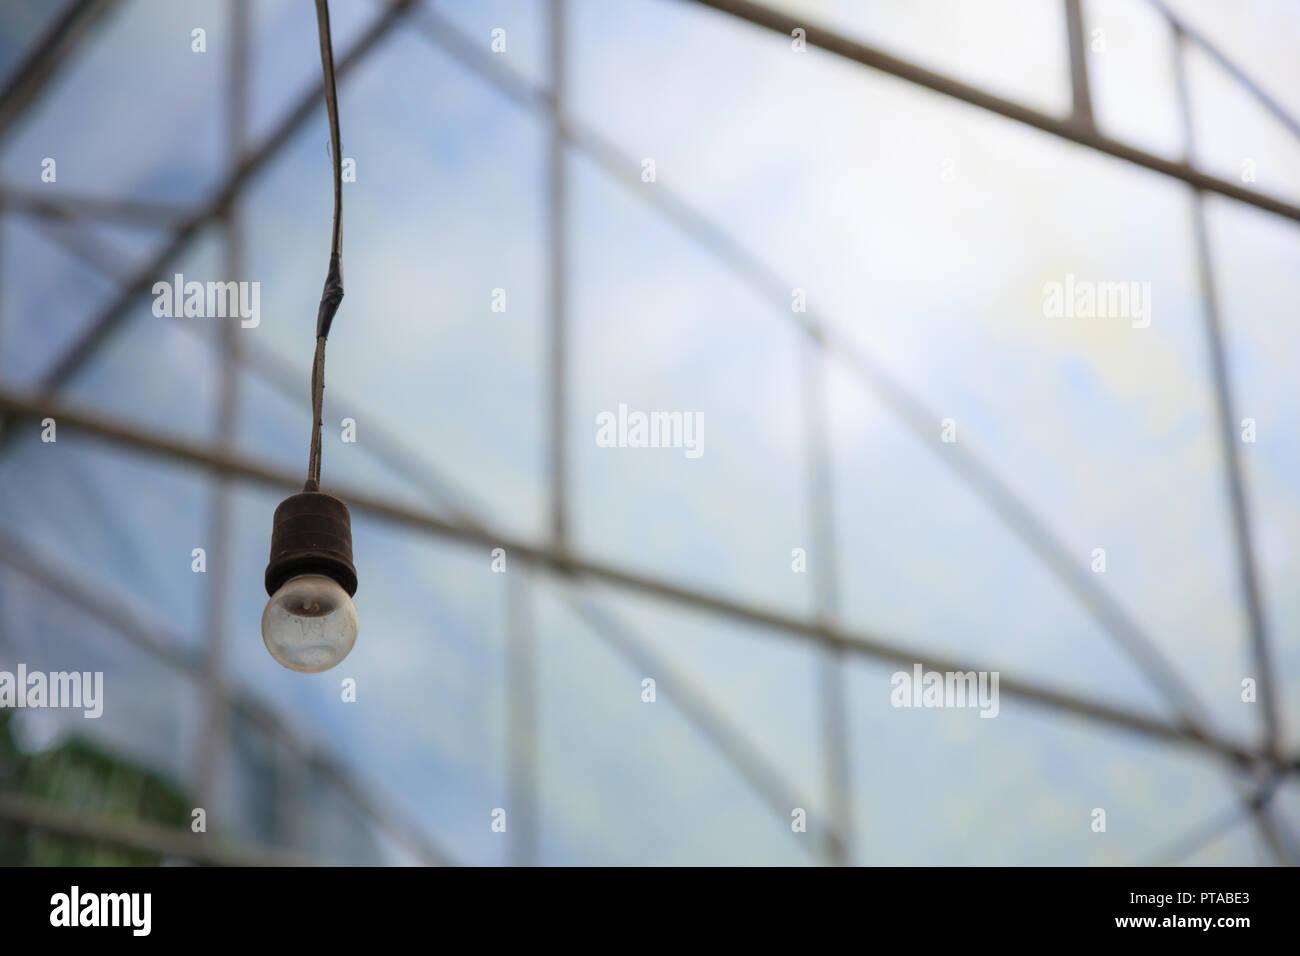 old aged hanging incandescent light bulb in the industrial agriculture greenhouse background. indoor artificial lighting equipment tool design for com Stock Photo